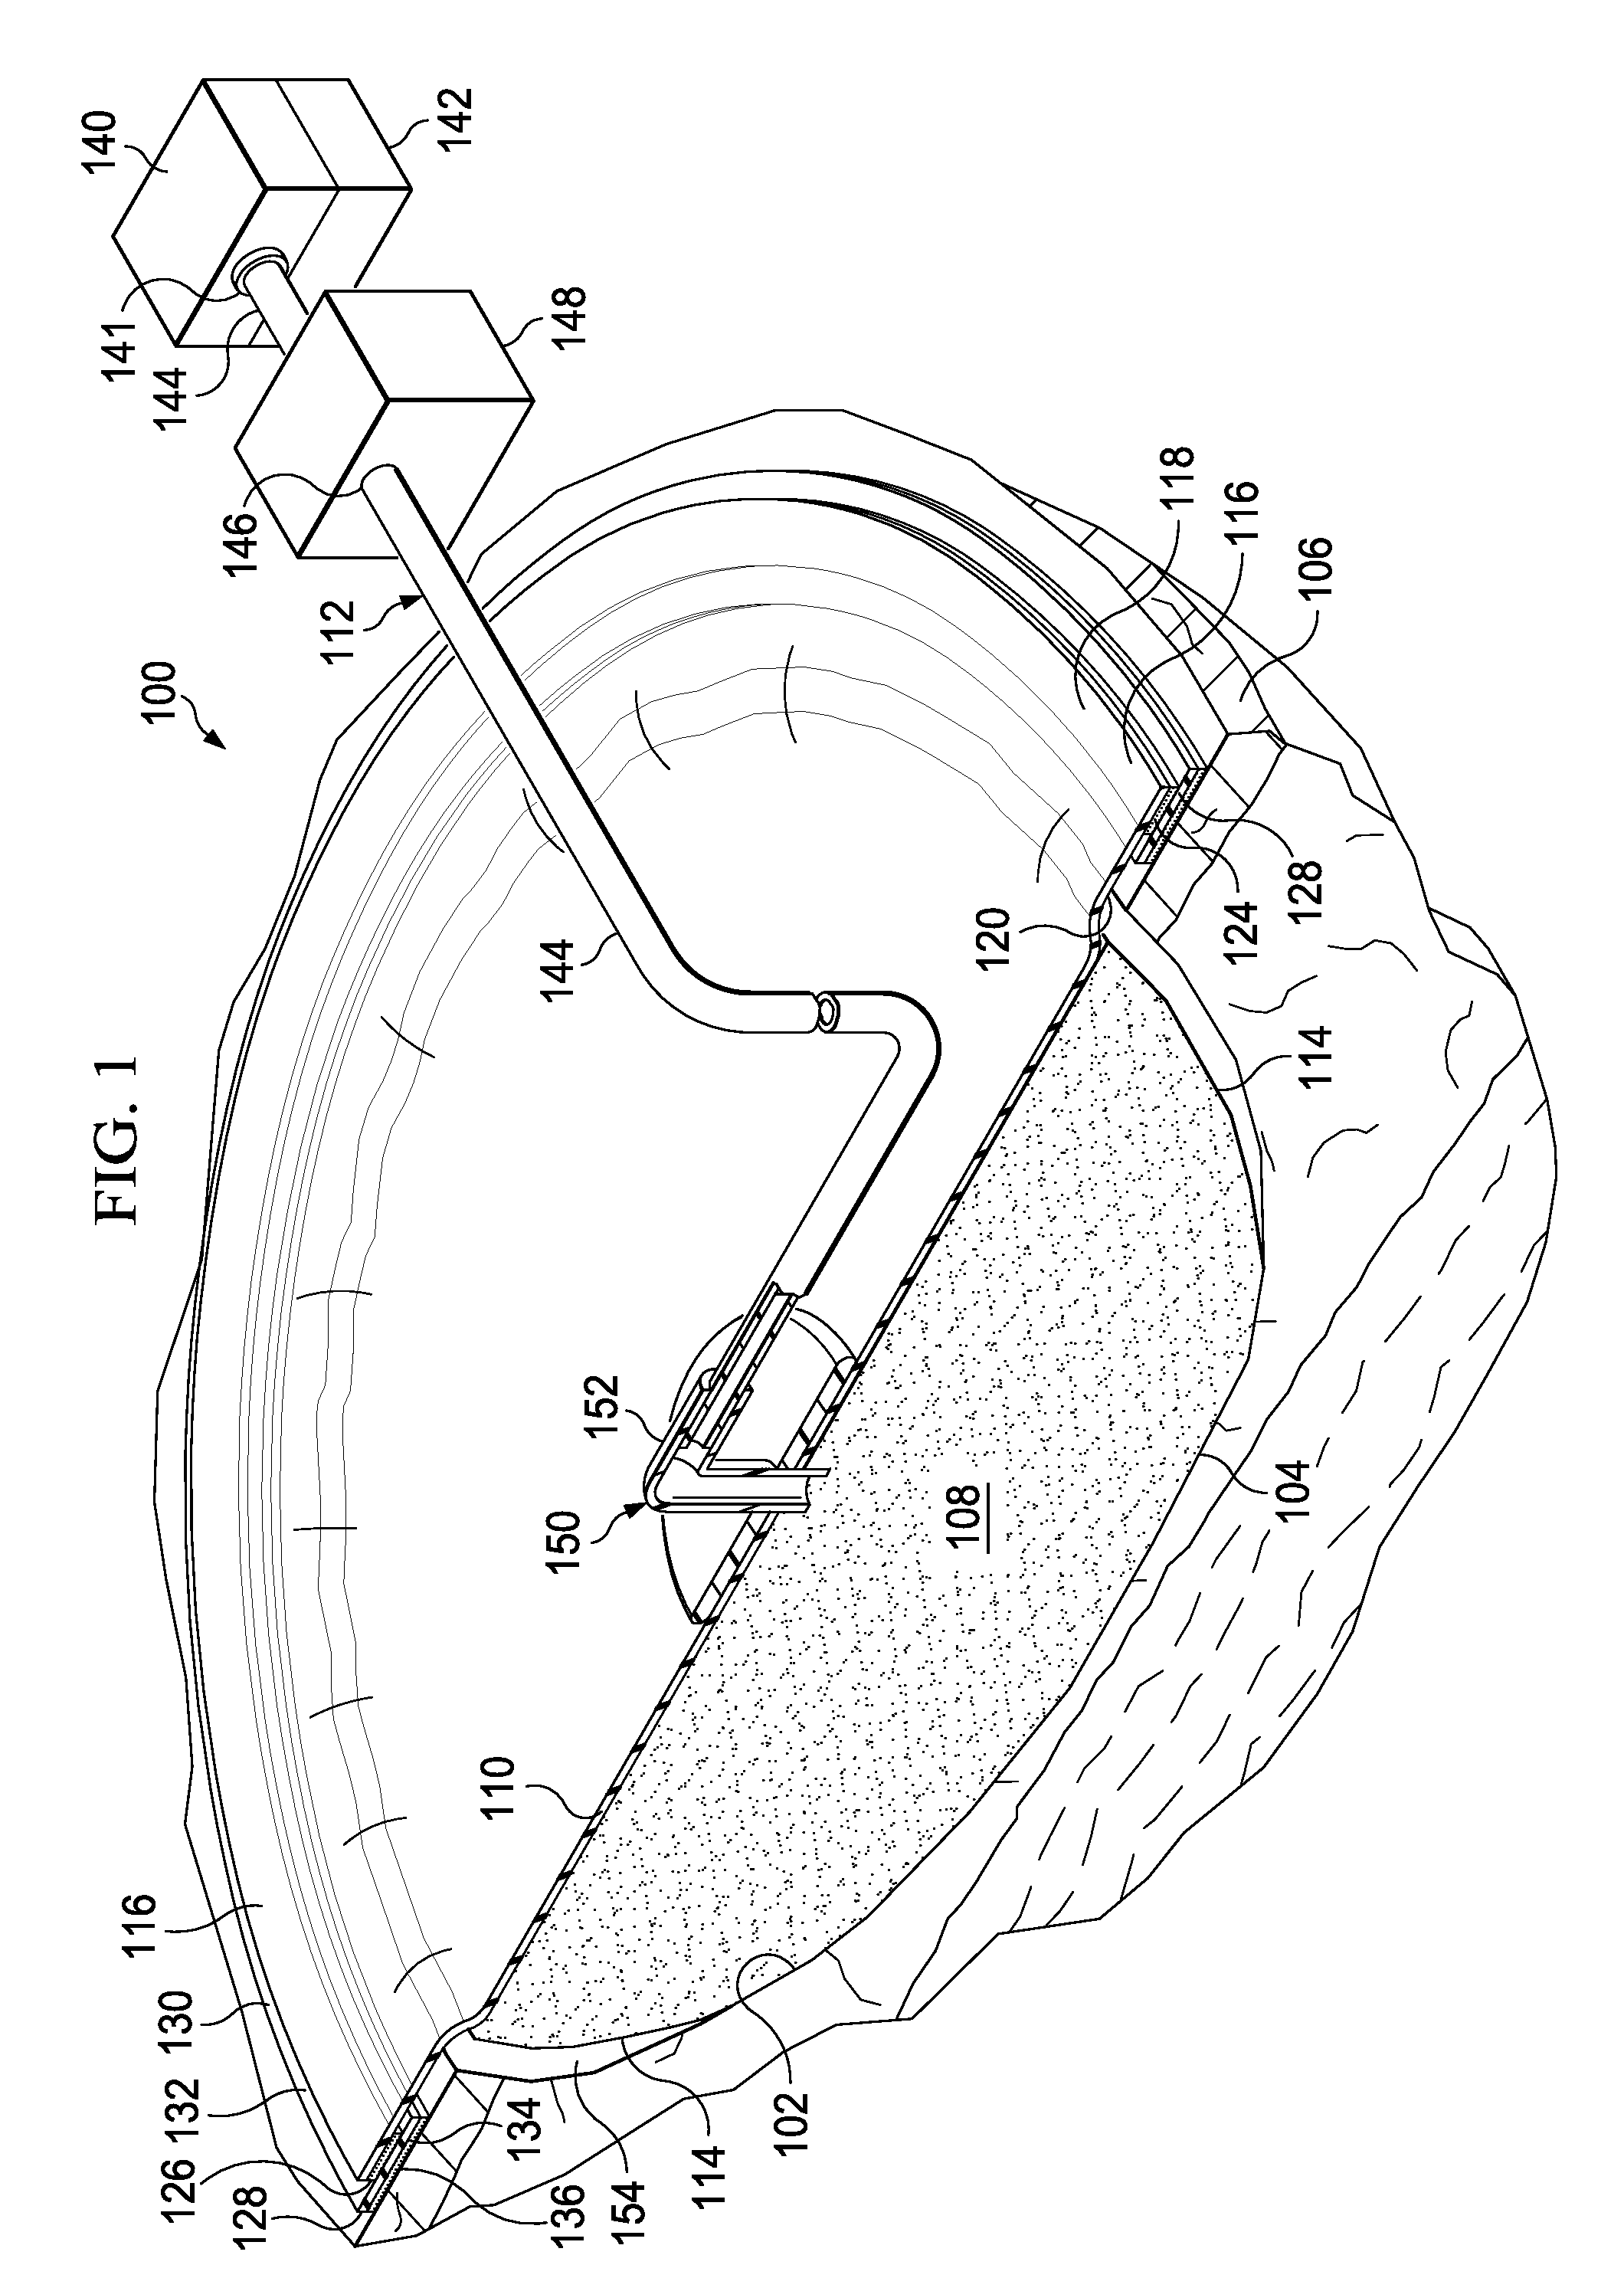 Reduced-pressure system and method employing a gasket